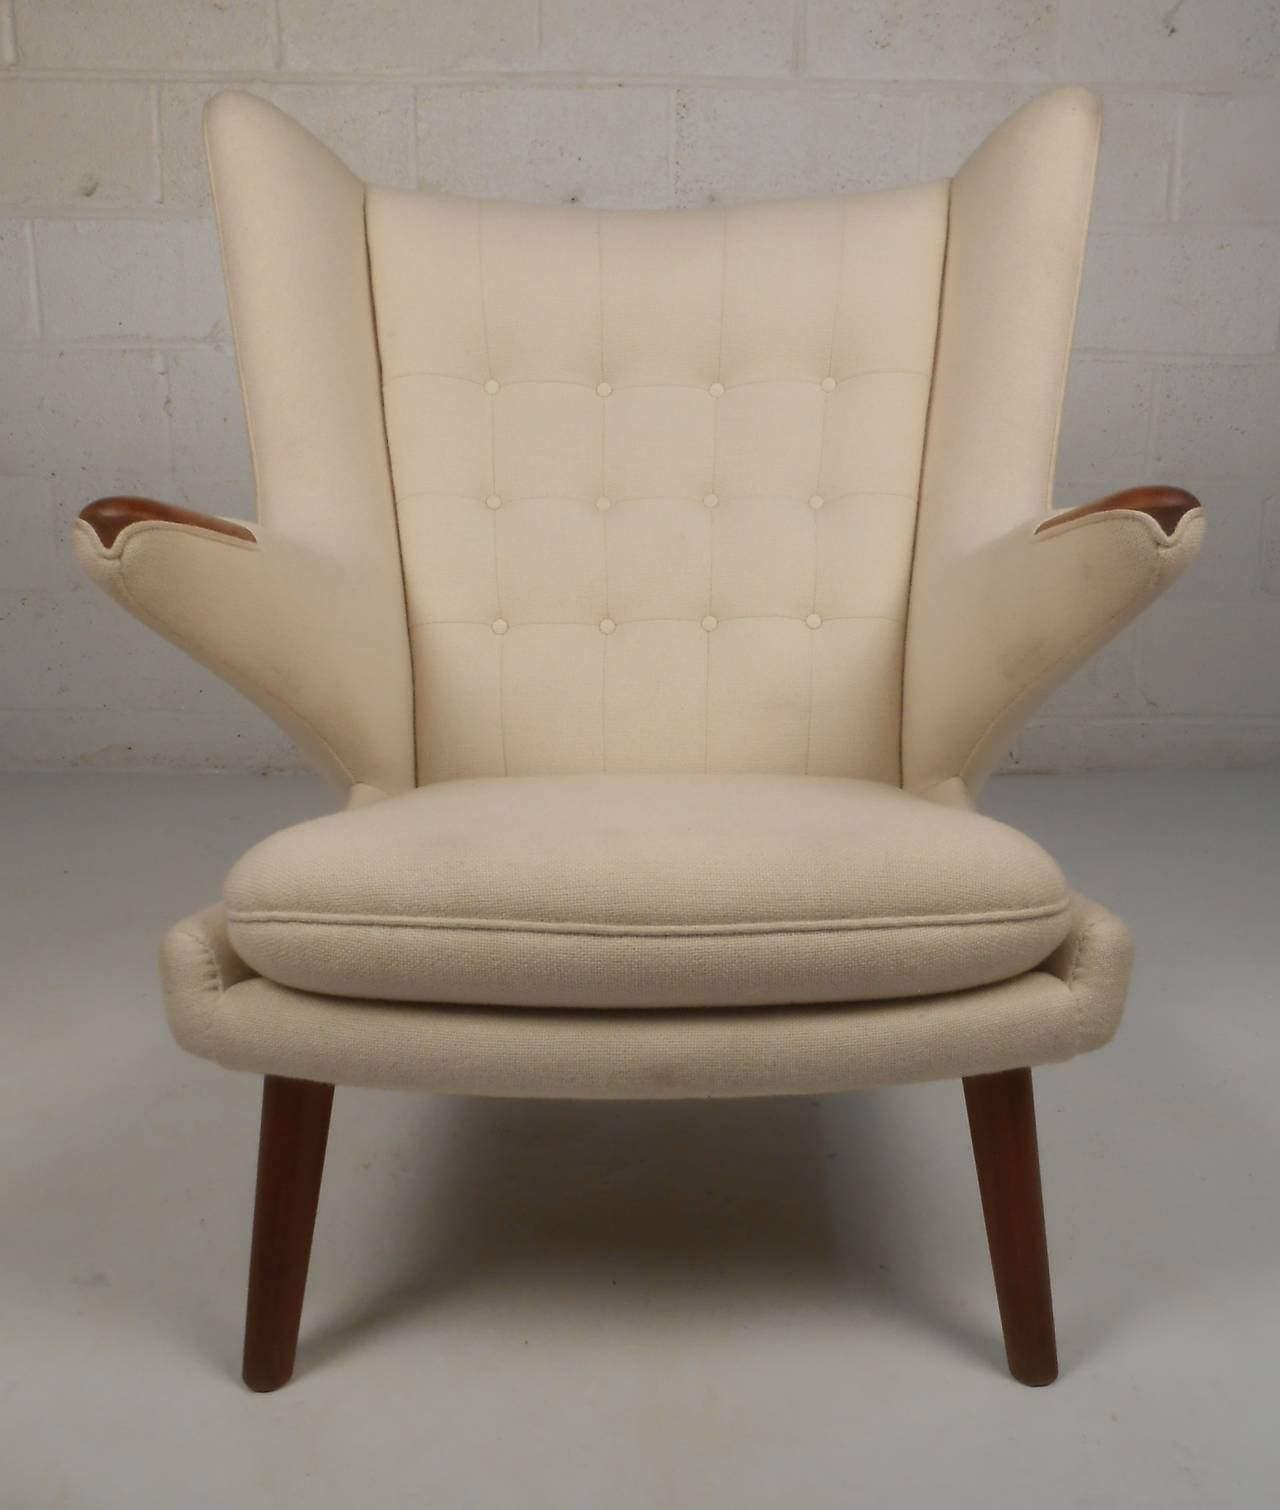 Iconic lounge chair by Hans J. Wegner and produced by A.P. Stolen. Please confirm item location (NY or NJ) with dealer.